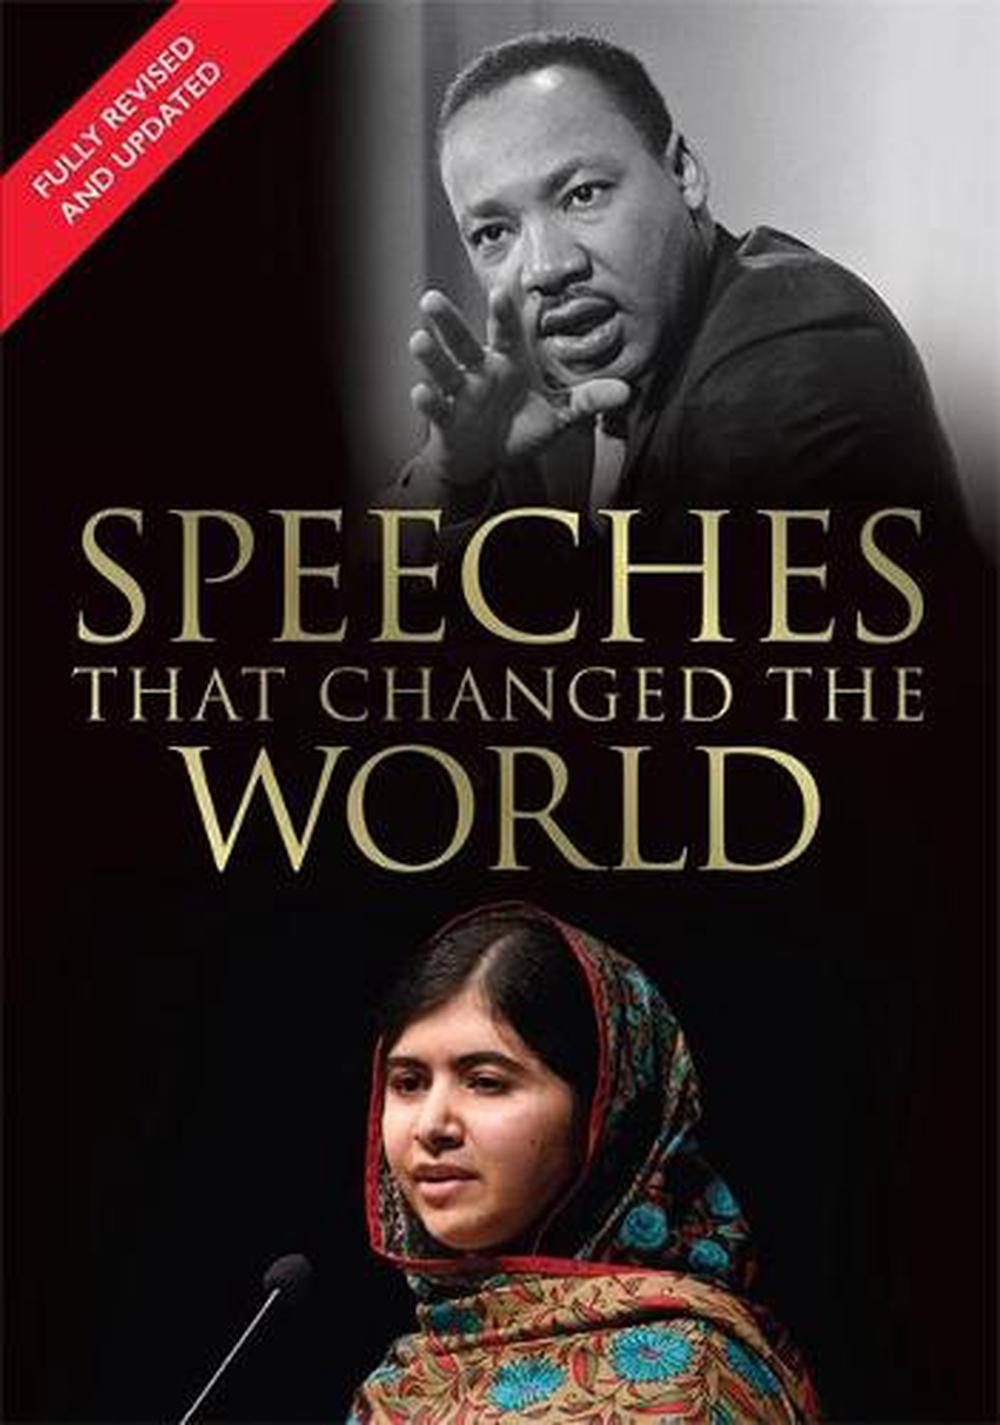 most powerful speeches that changed the world